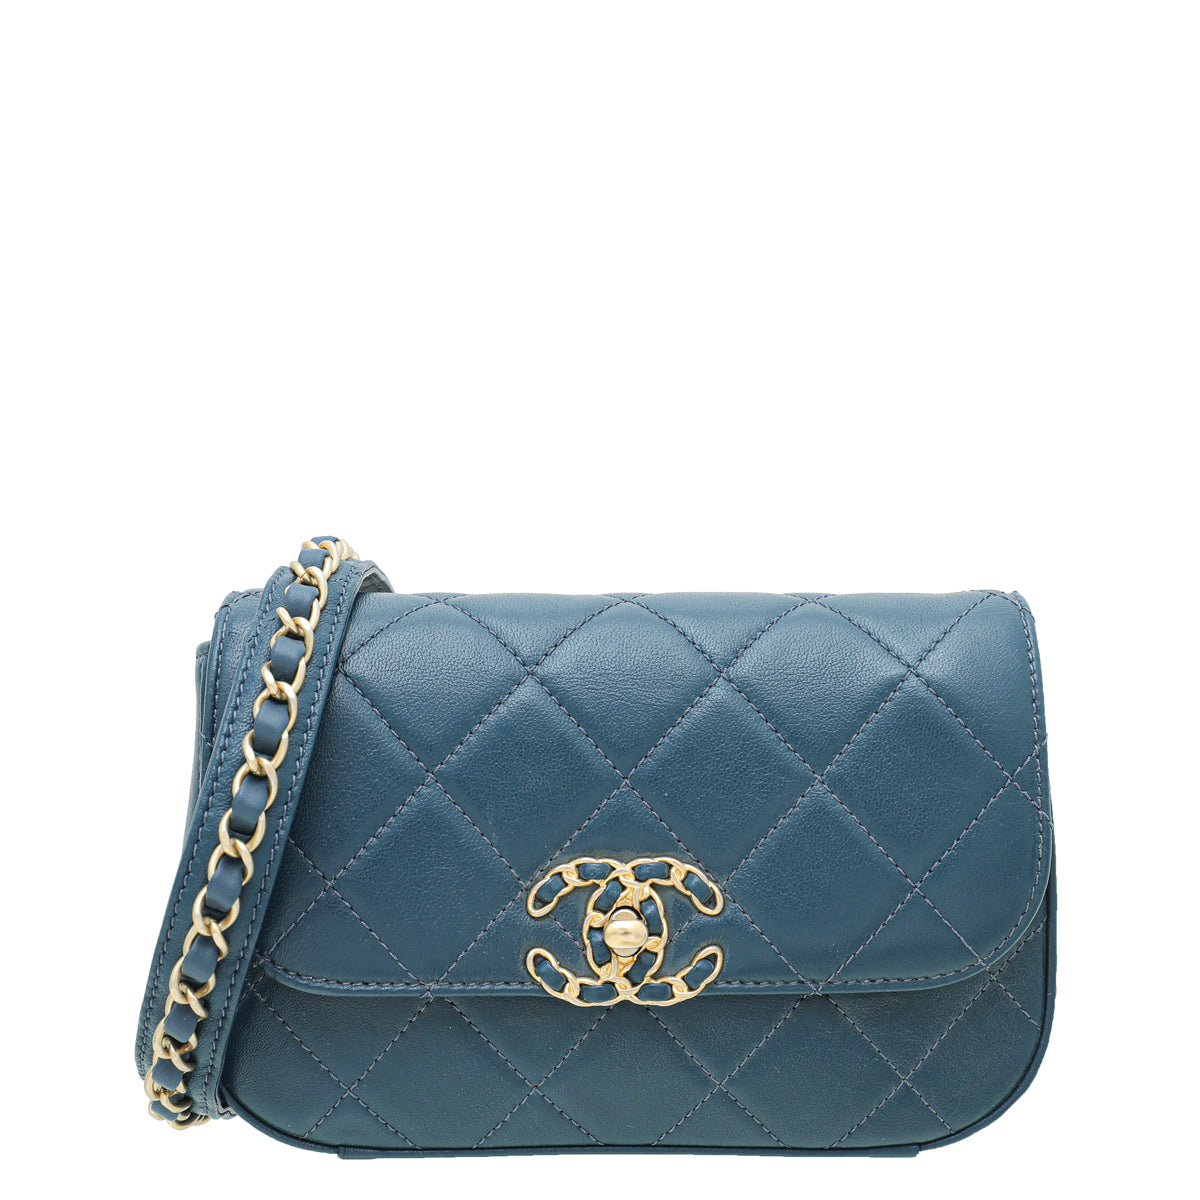 CHANEL Infinity Chain Quilted Leather Crossbody Bag Blue